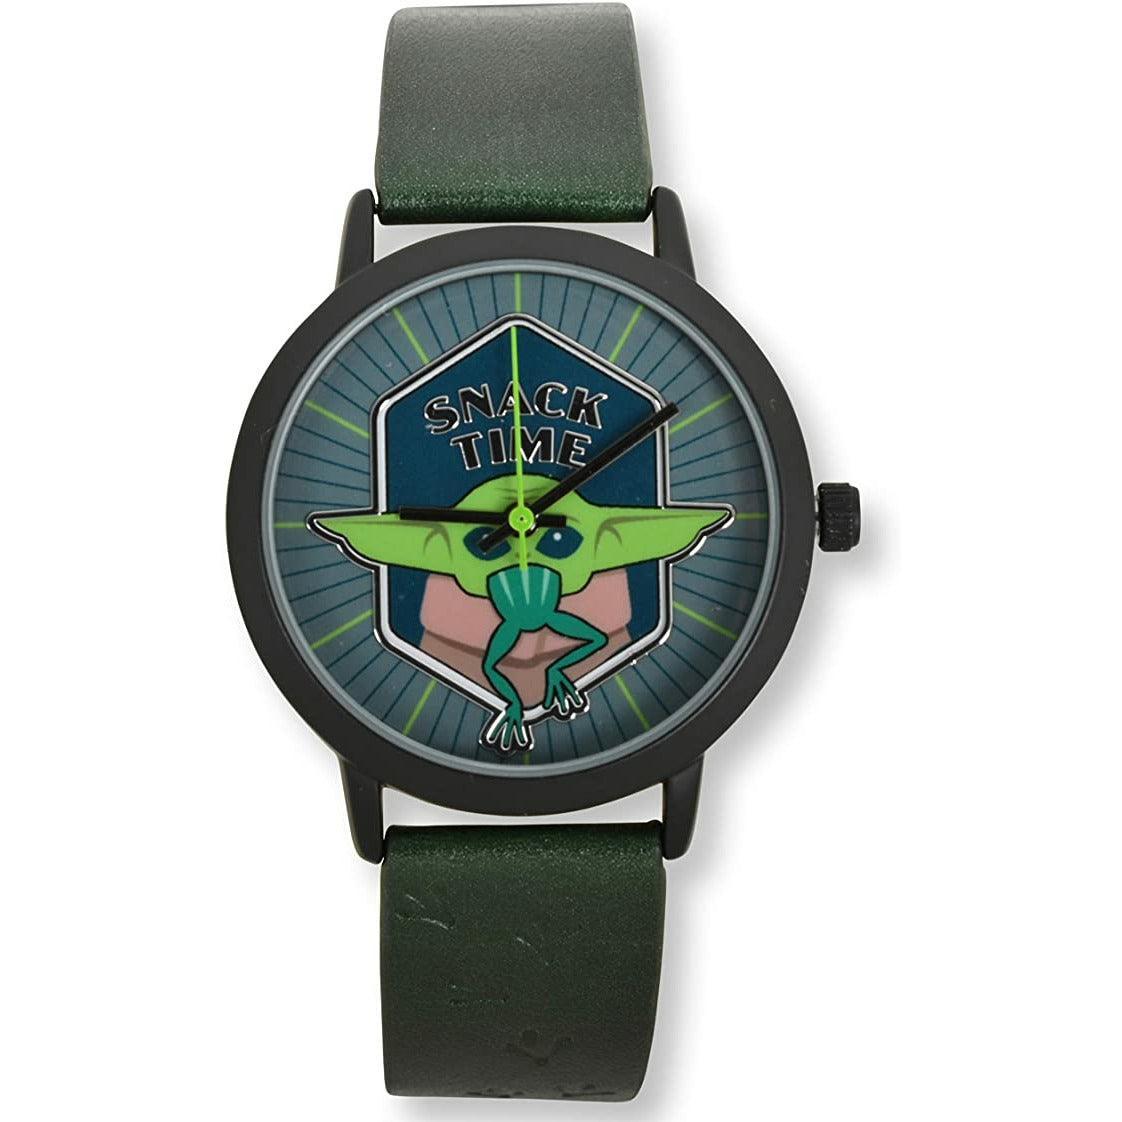 Star Wars- The Mandalorian Grogo - Snack Time Watch - BumbleToys - 5-7 Years, Boys, Dress Up Accessories, OXE, Pre-Order, Wrist Watches